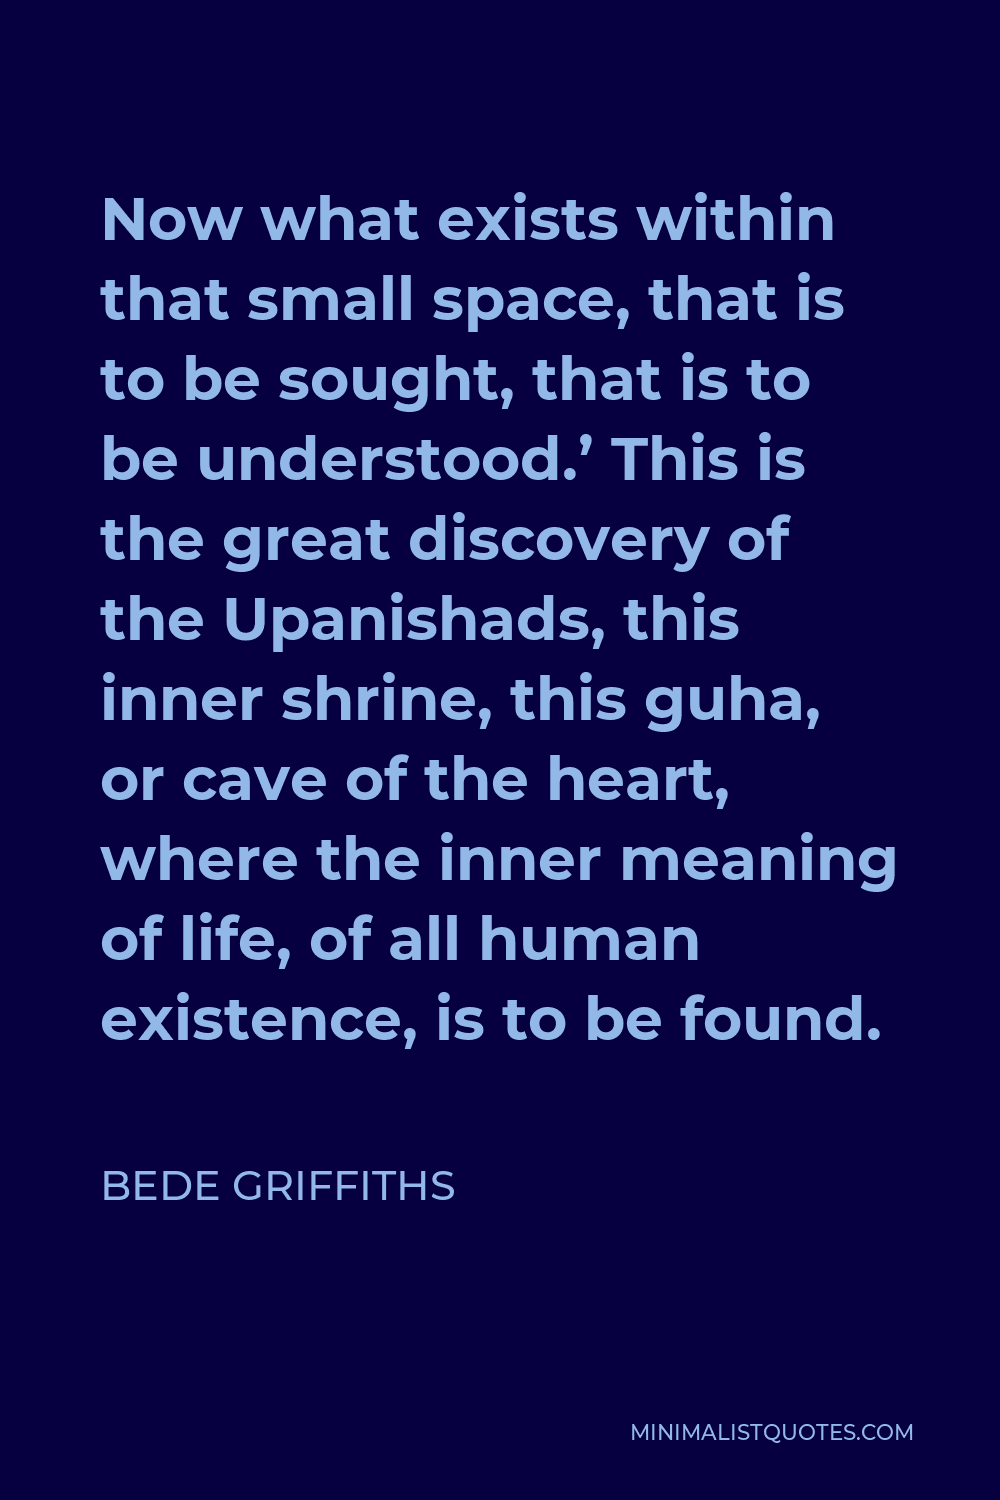 Bede Griffiths Quote - Now what exists within that small space, that is to be sought, that is to be understood.’ This is the great discovery of the Upanishads, this inner shrine, this guha, or cave of the heart, where the inner meaning of life, of all human existence, is to be found.